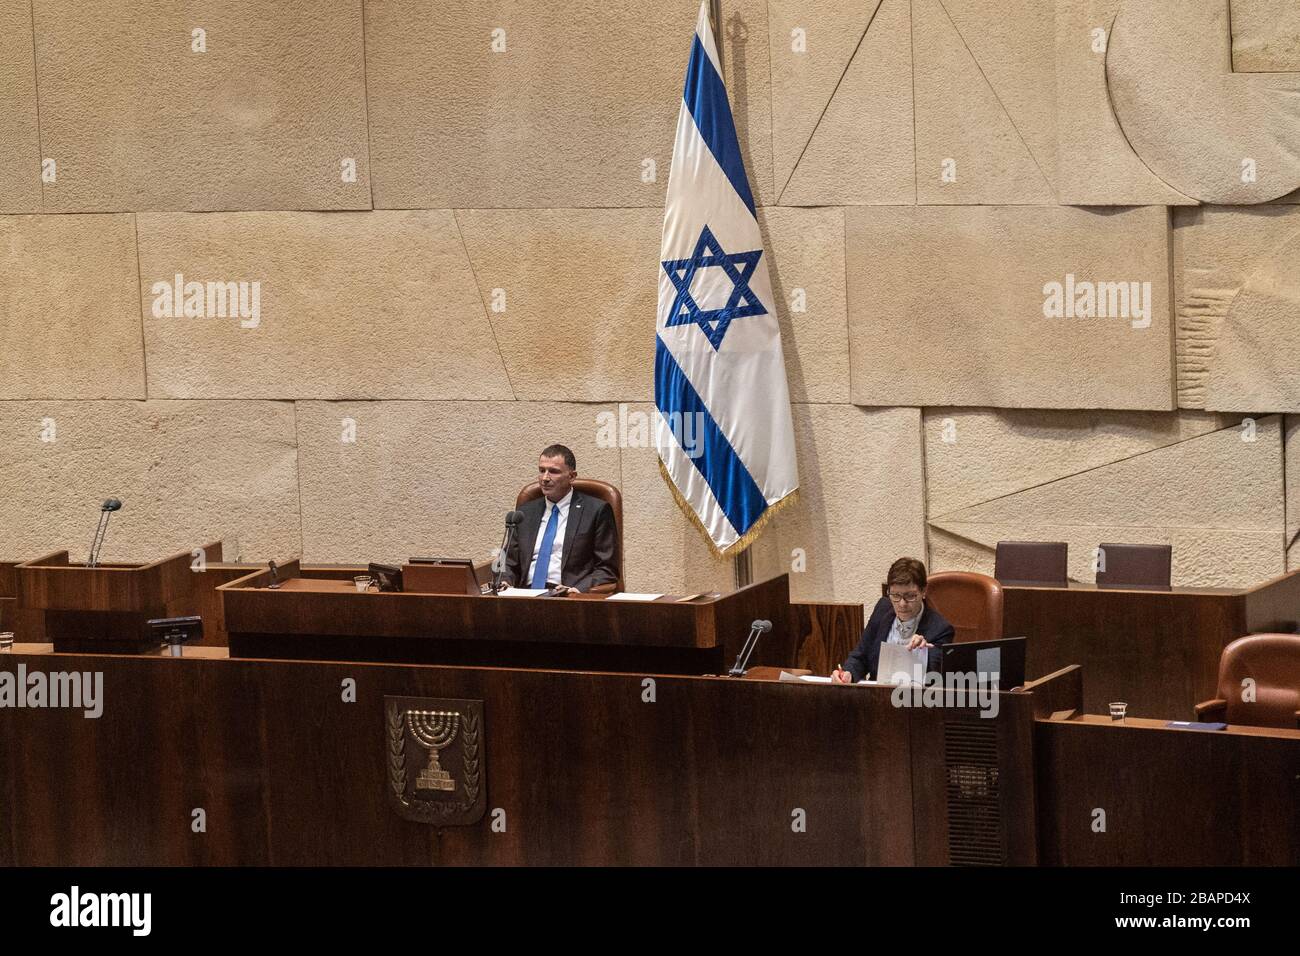 Pictures of Israeli Prime Ministers in The Knesset unicameral national legislature of Israel Stock Photo